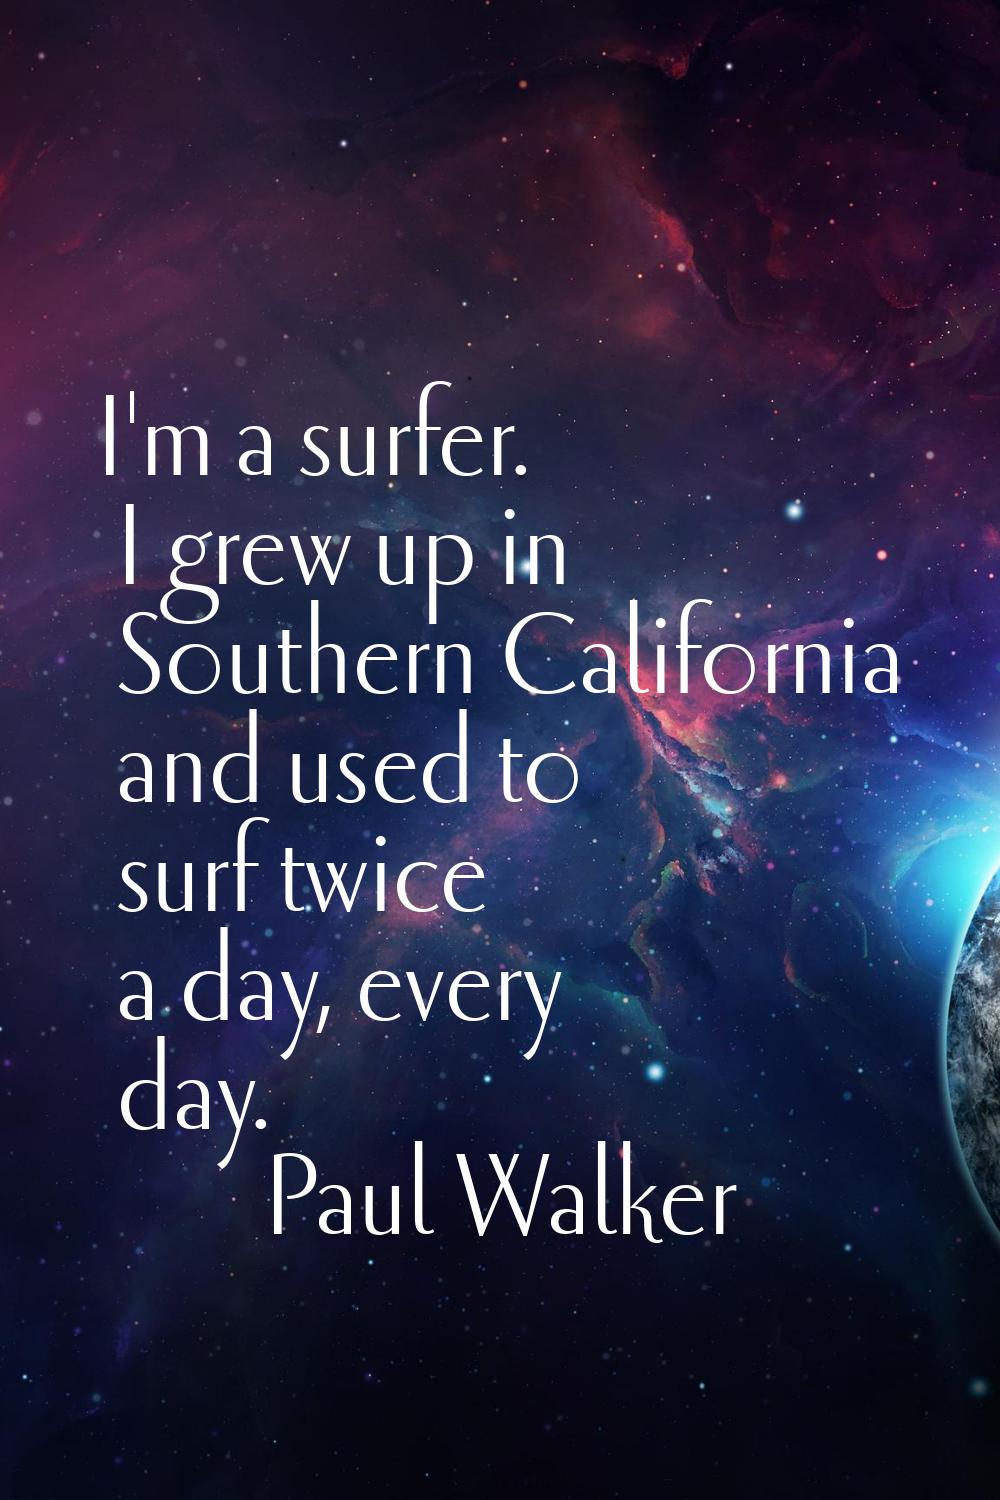 I'm a surfer. I grew up in Southern California and used to surf twice a day, every day.